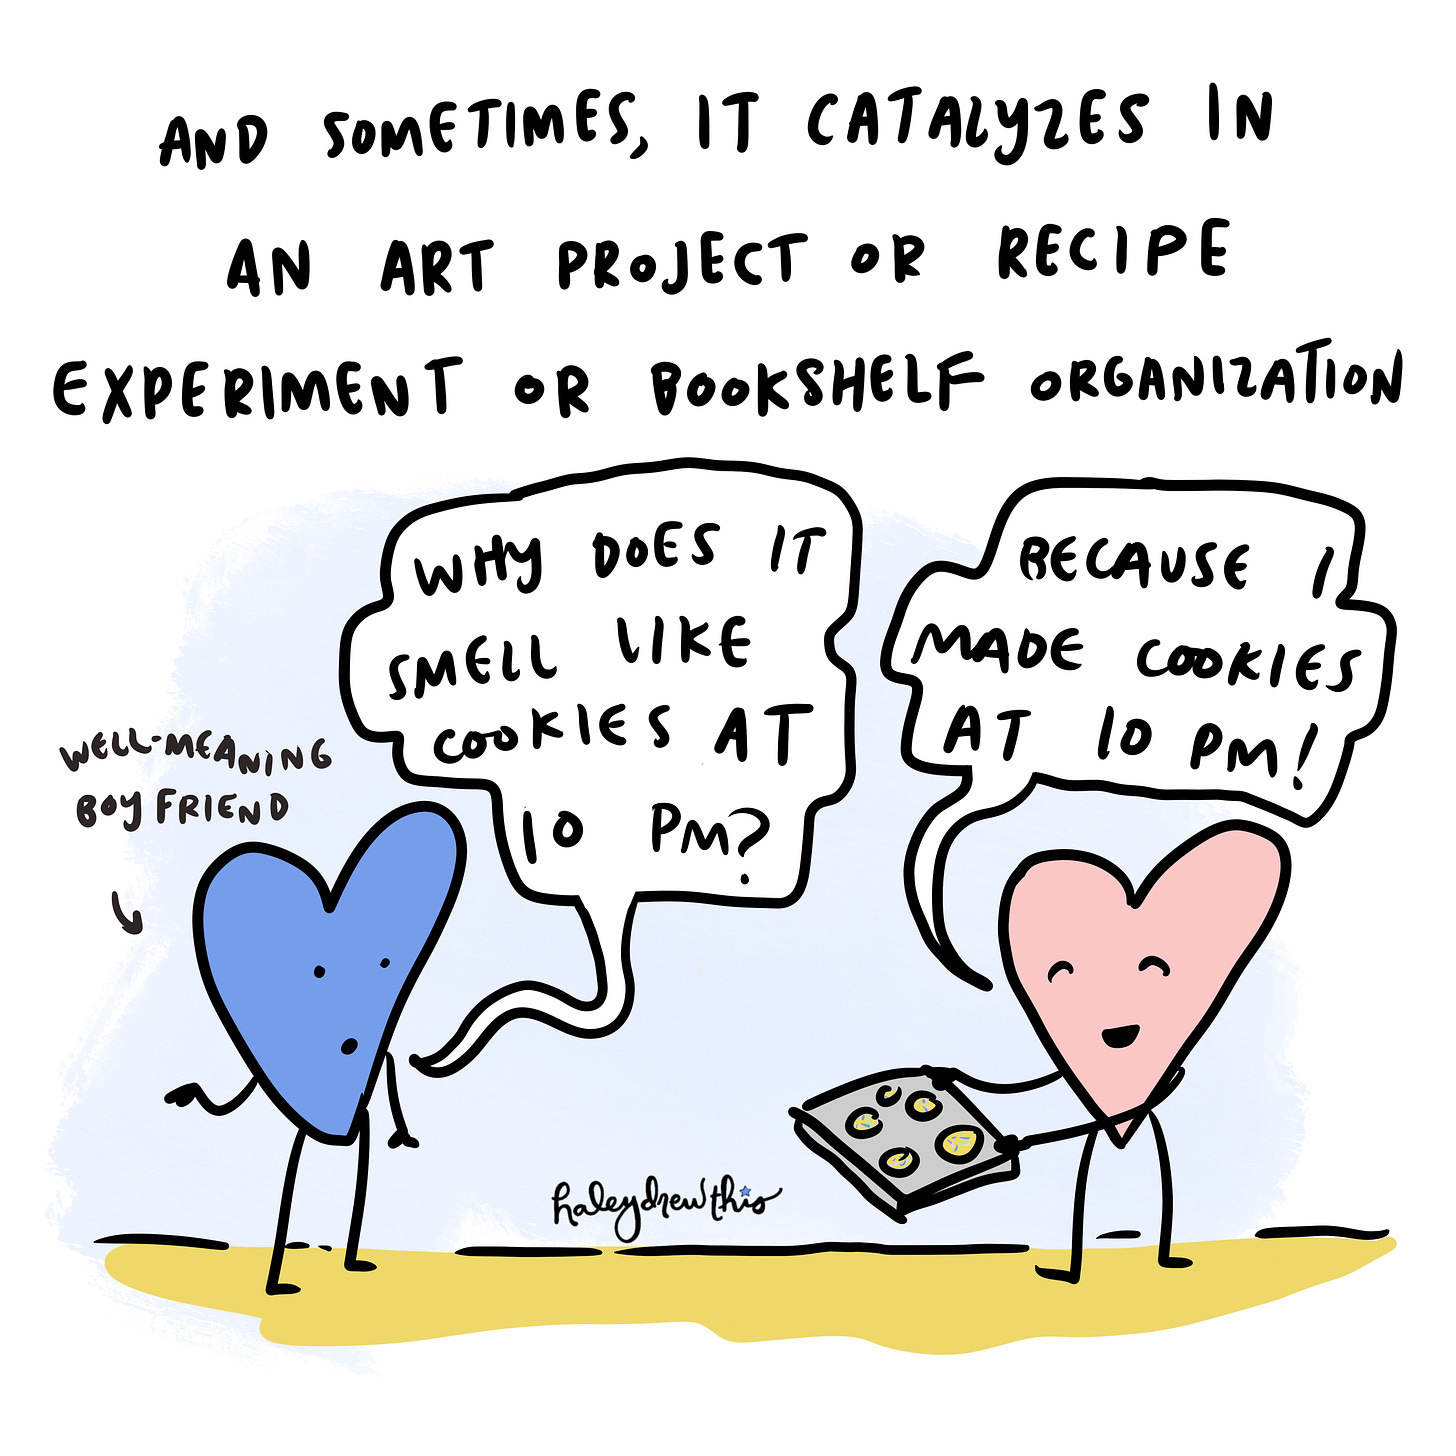 And sometimes it catalyzes in an art project or recipe experiment or bookshelf organization. Boyfriend heart: "Why does it smell like cookies at 10 PM?" pink heart: "Because I made cookies at 10 PM!"